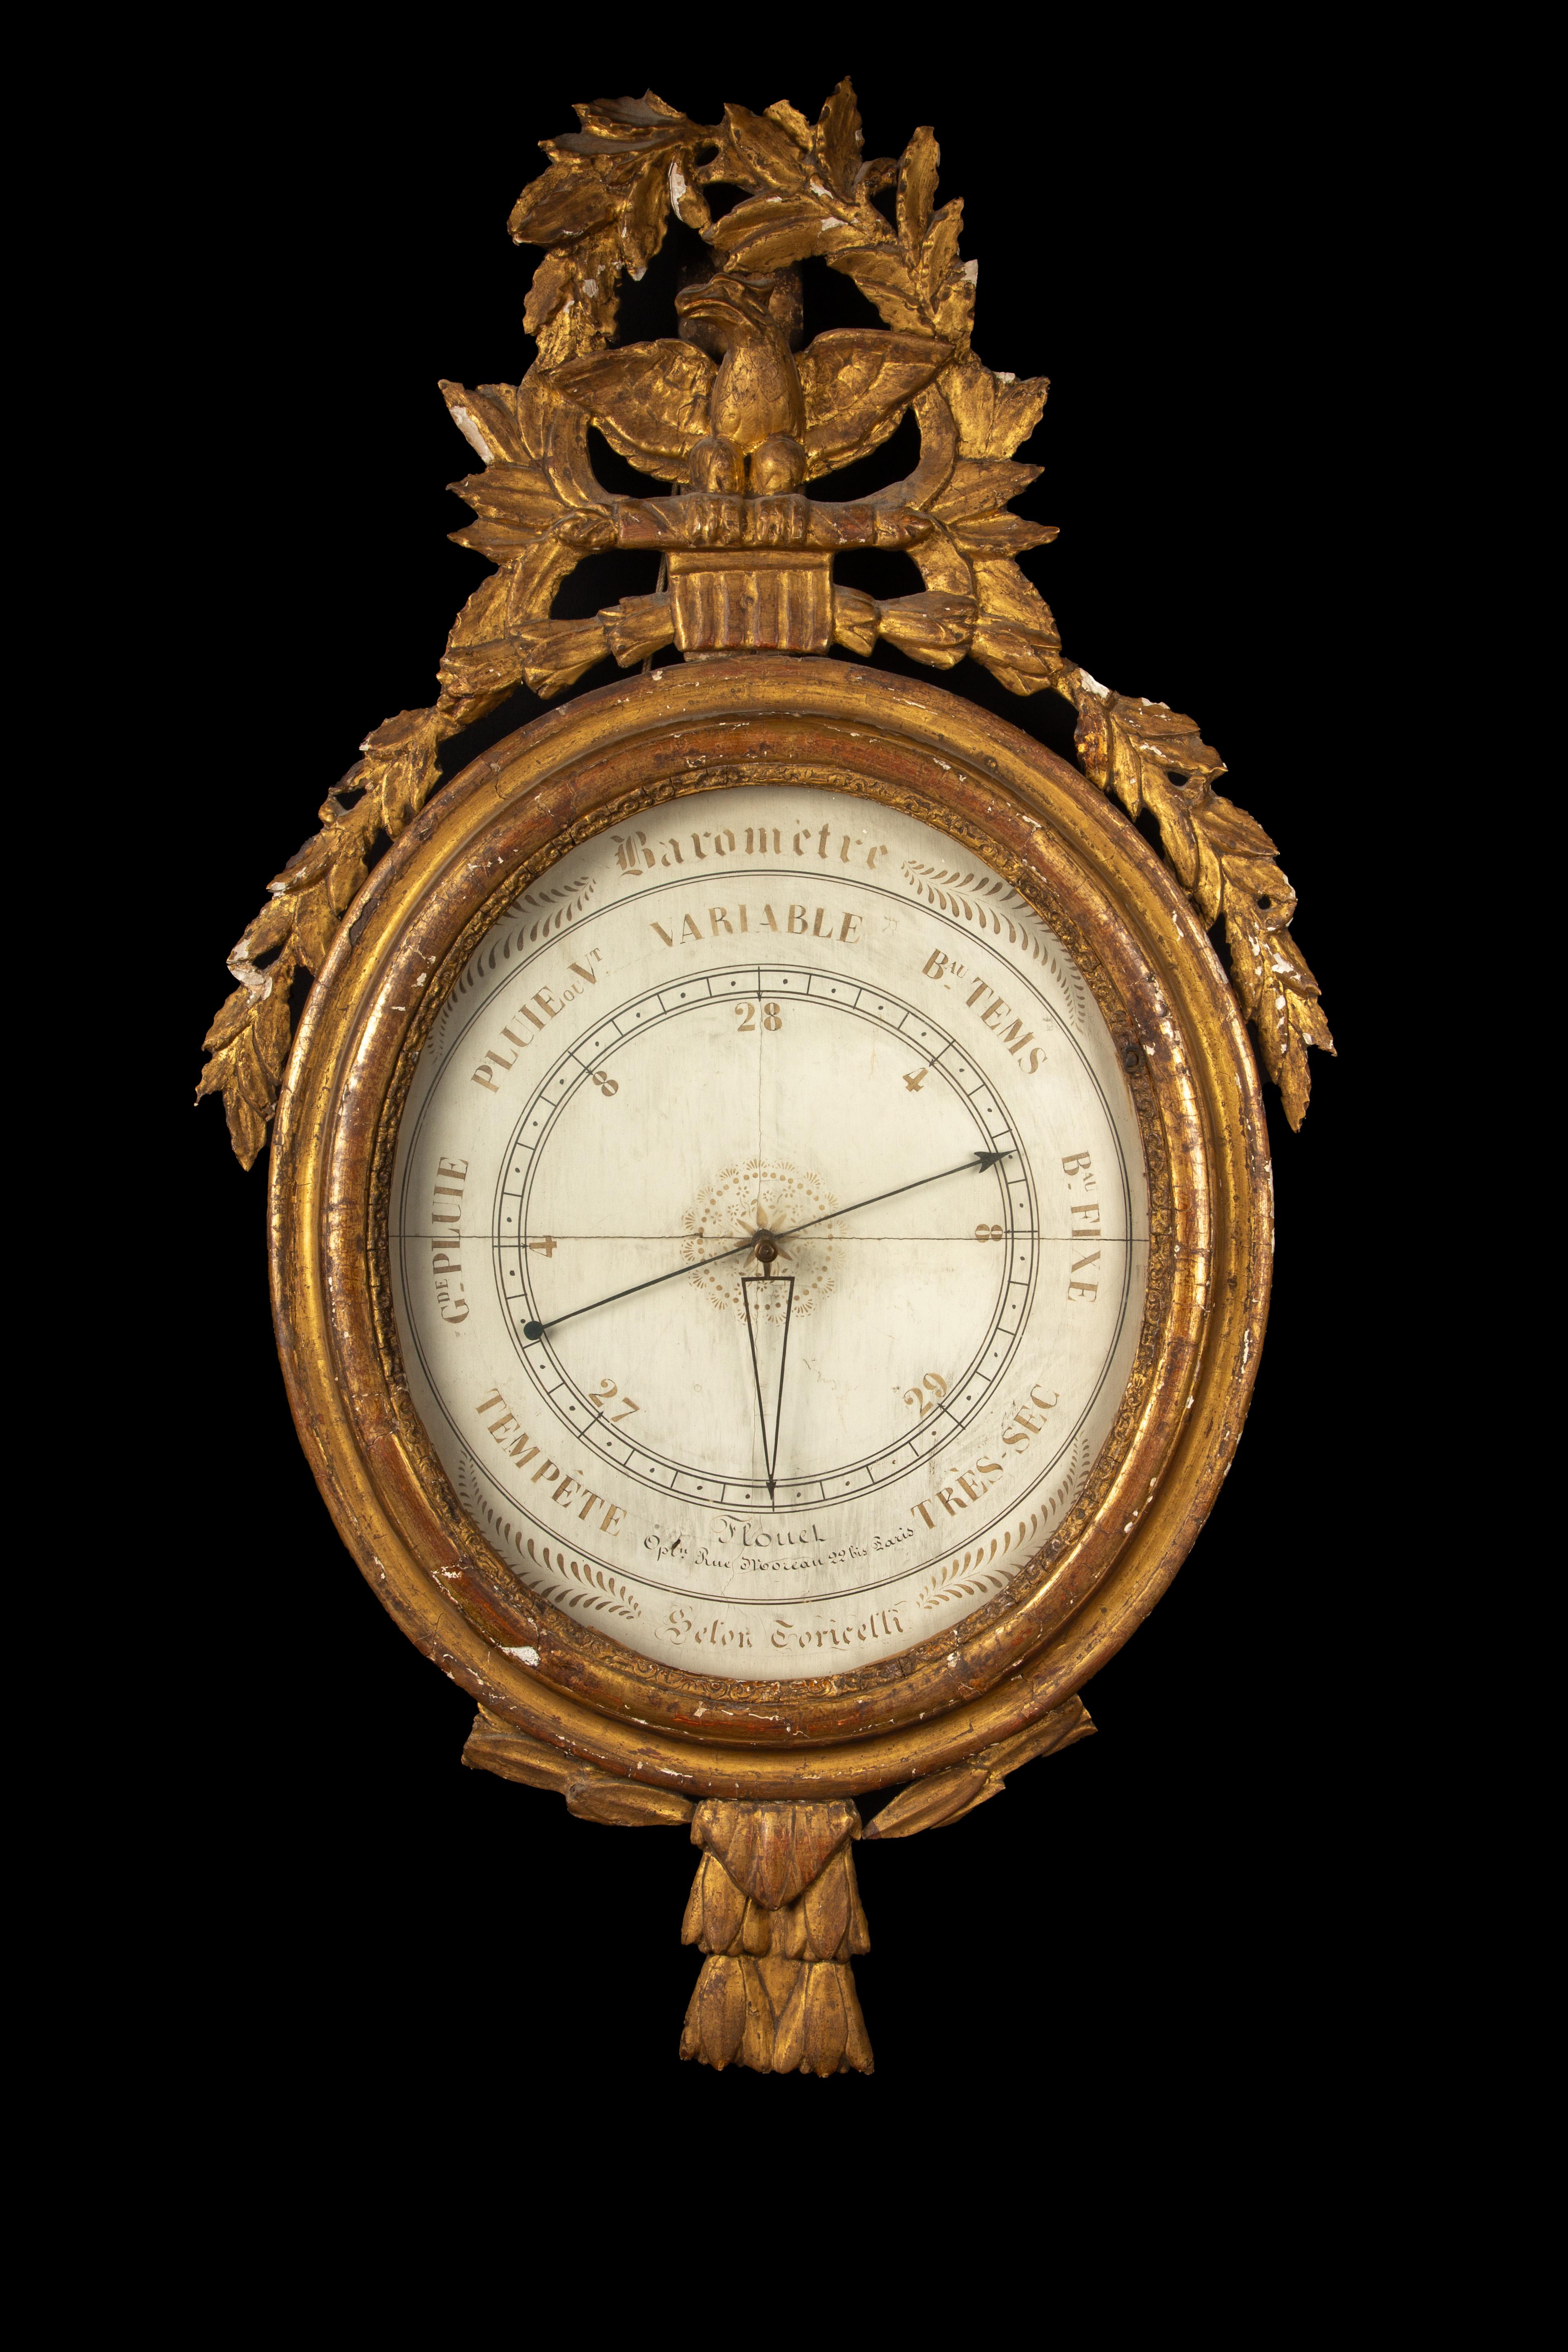 This Mercury barometer, housed in a stunning gilded wood ring frame adorned with a skillfully carved pediment featuring an eagle and delicate oak leaves, exemplifies the exquisite craftsmanship of its time. The meticulous detailing on the frame adds